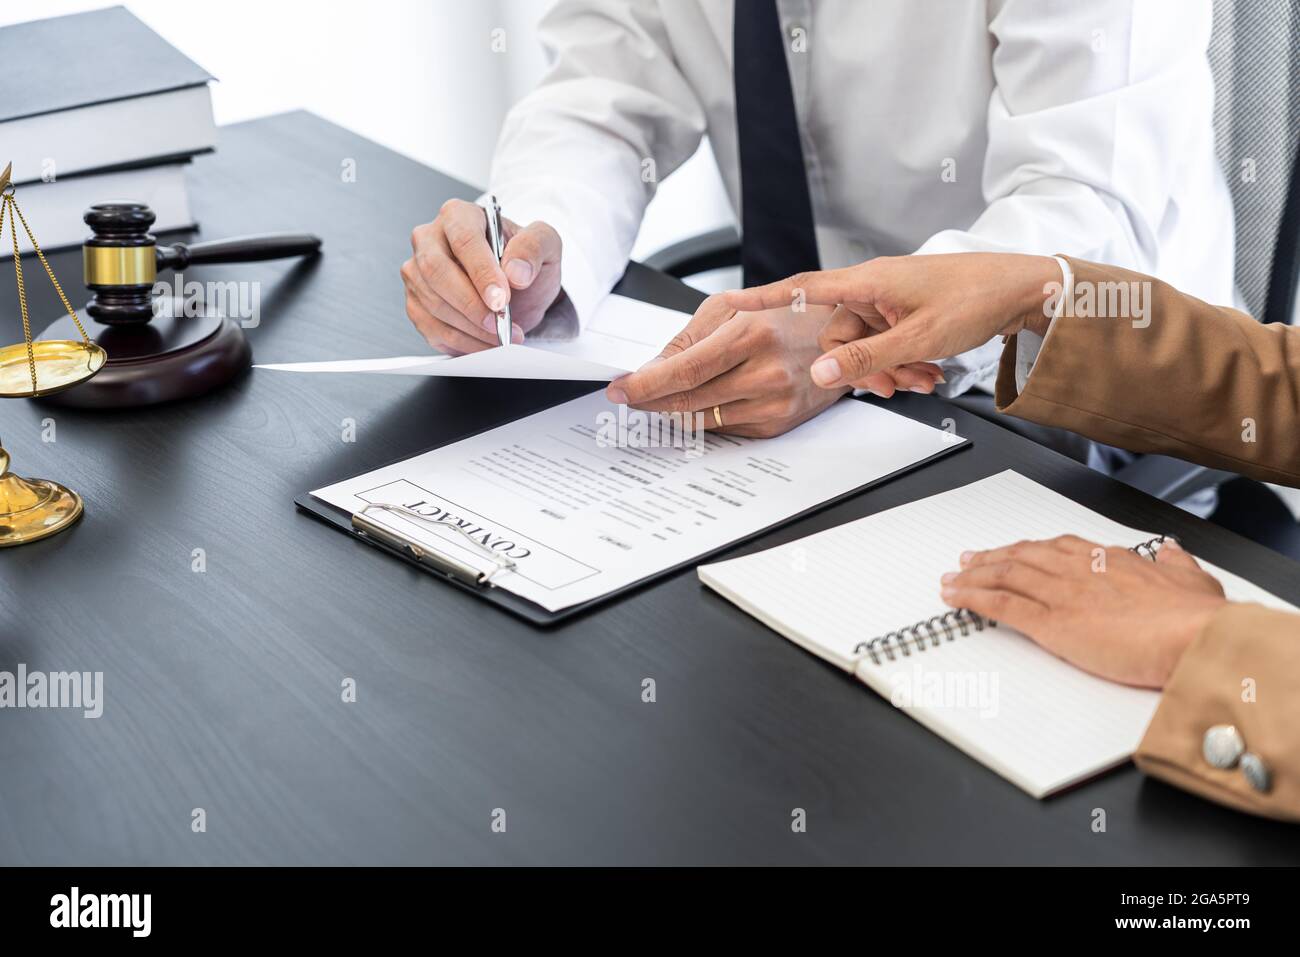 lawyer or judge meeting with client consulting help discussing contract paper agreement Stock Photo